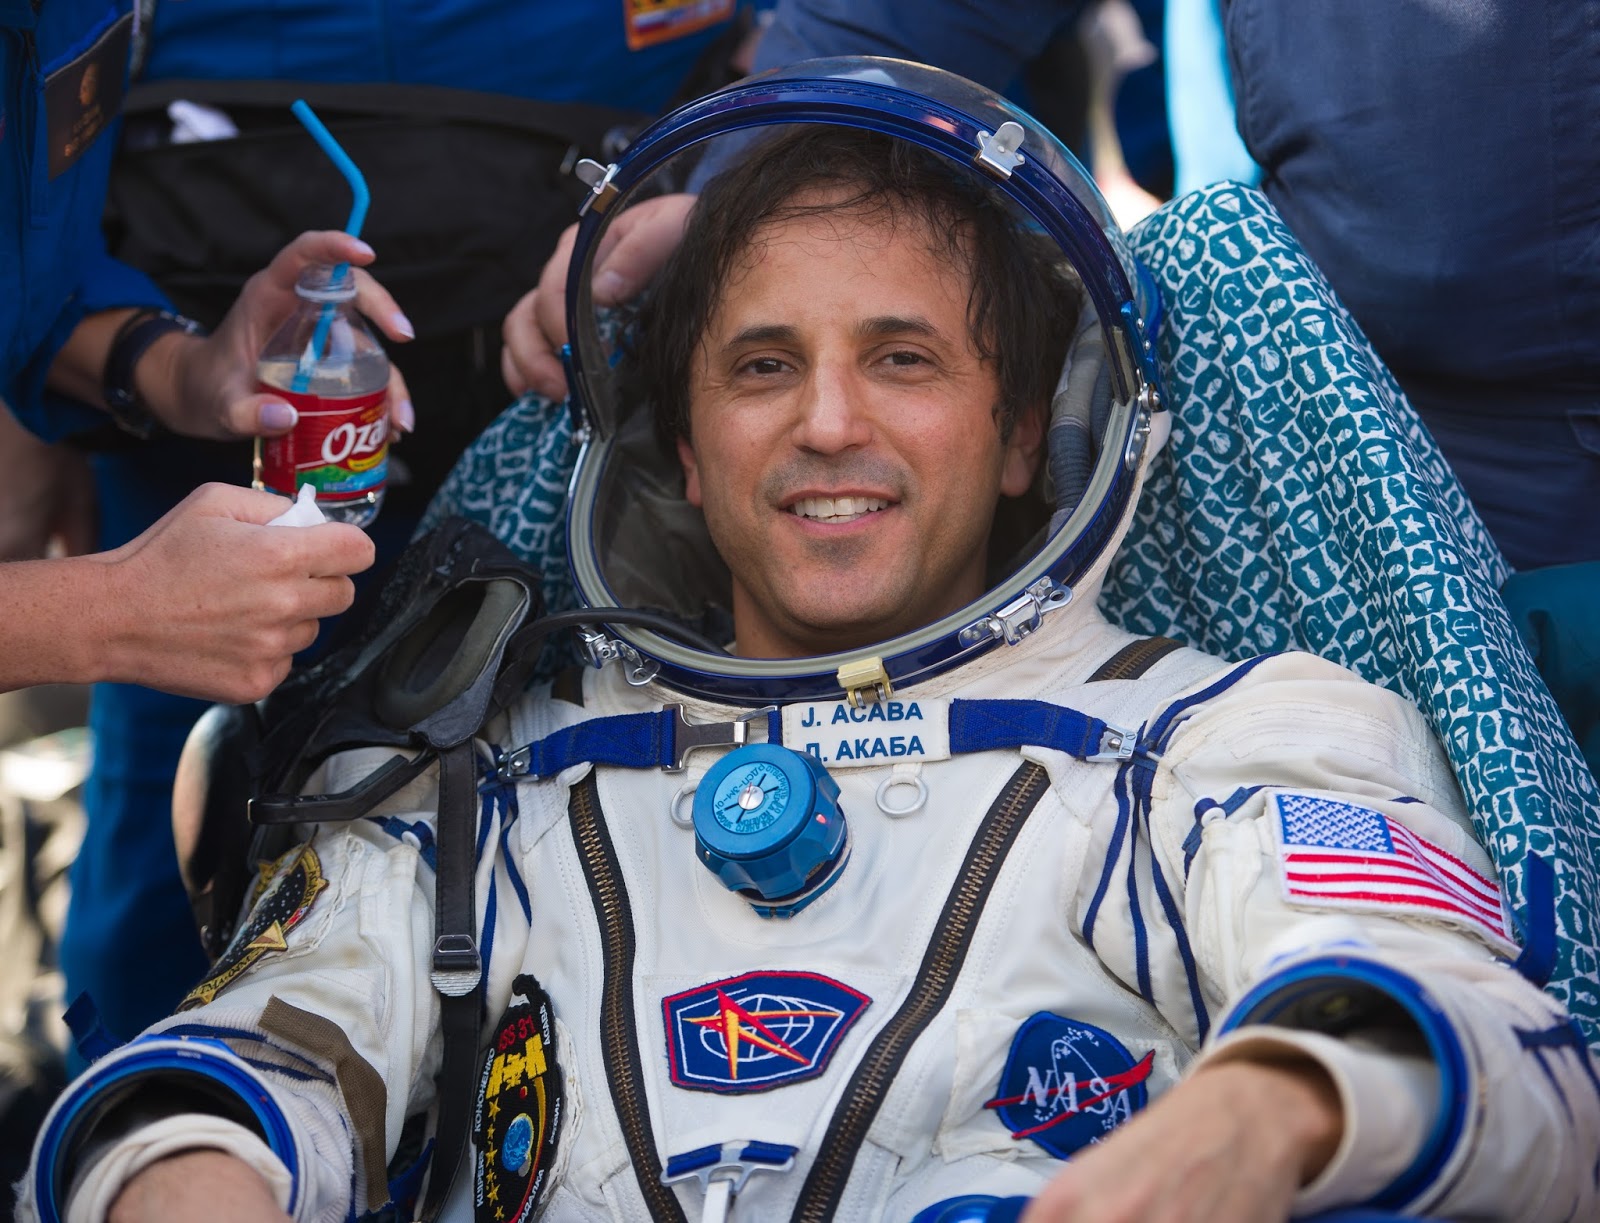 Astronaut Joe Acaba To DJ From Space on Dec. 7th